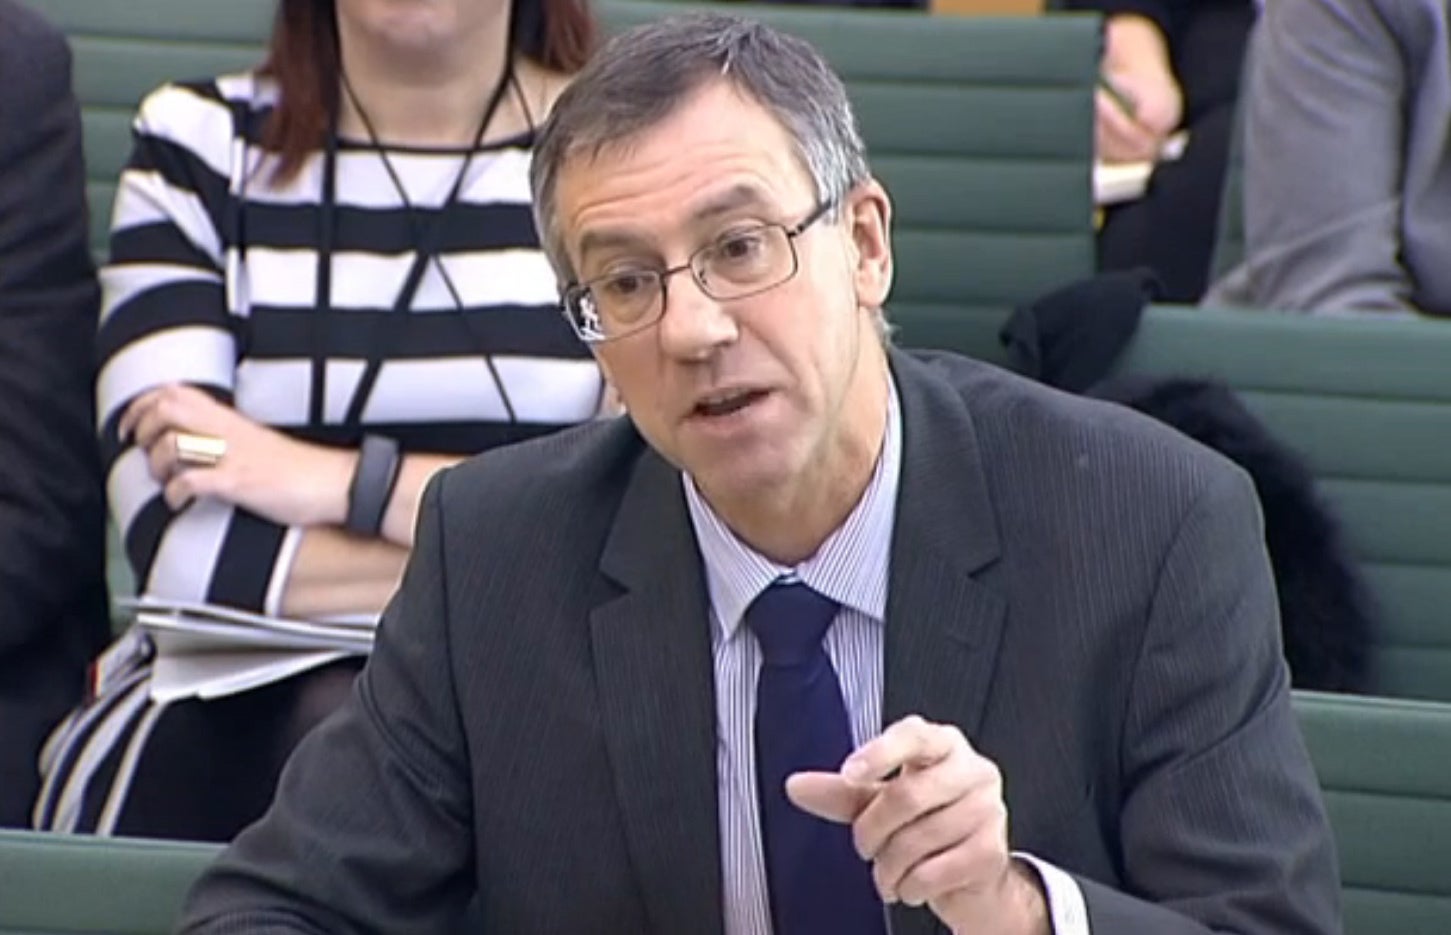 Michael Spurr has been told to step down as chief executive of HM Prison and Probation Service (HMPPS) after the permanent secretary decided that it was 'the right time to ask a new chief executive to take on this important role'